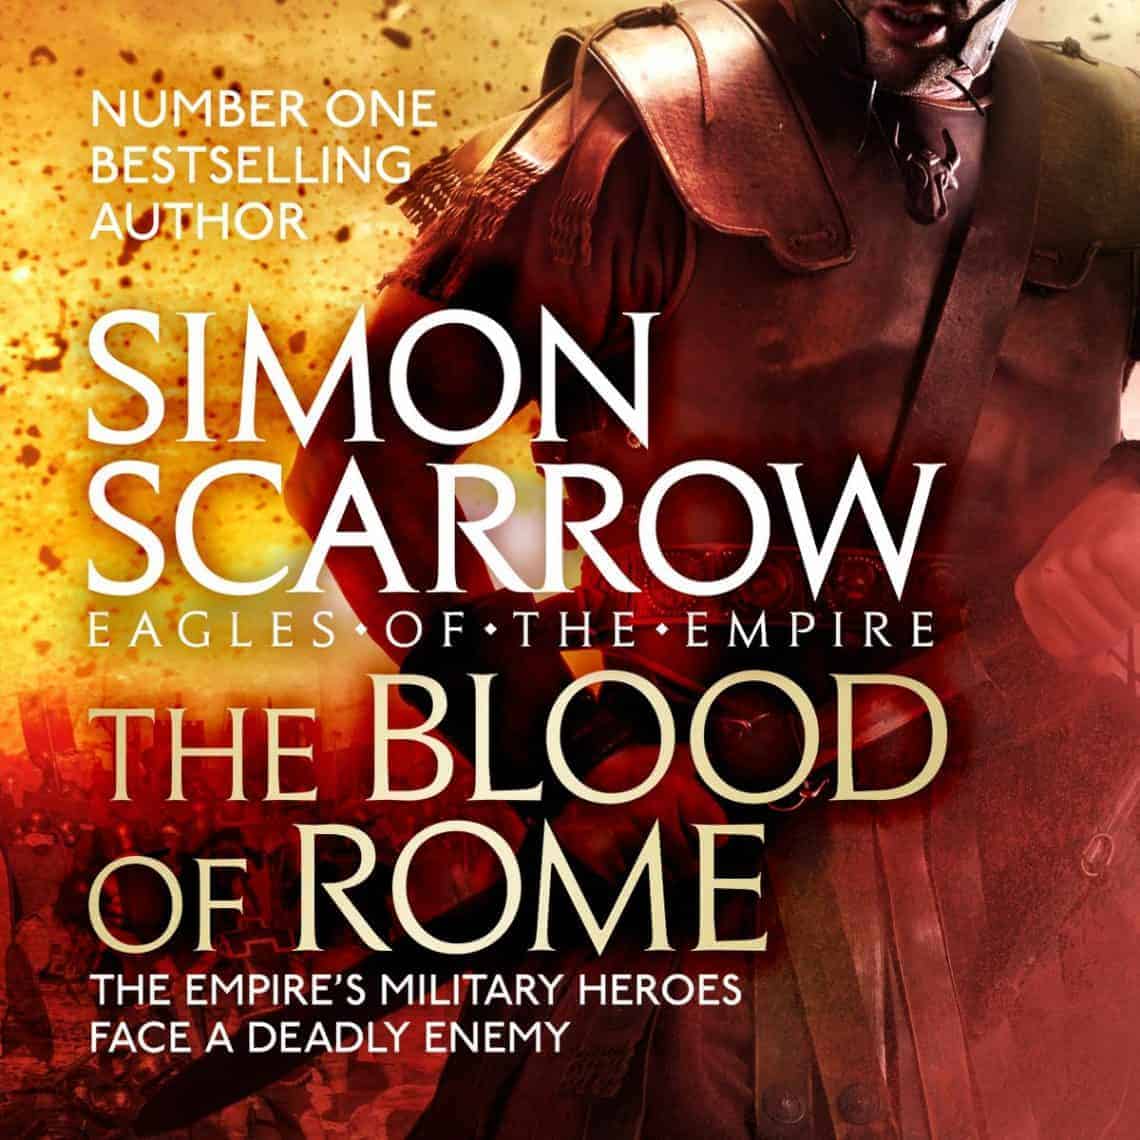 The Blood of Rome Audiobook Free Download